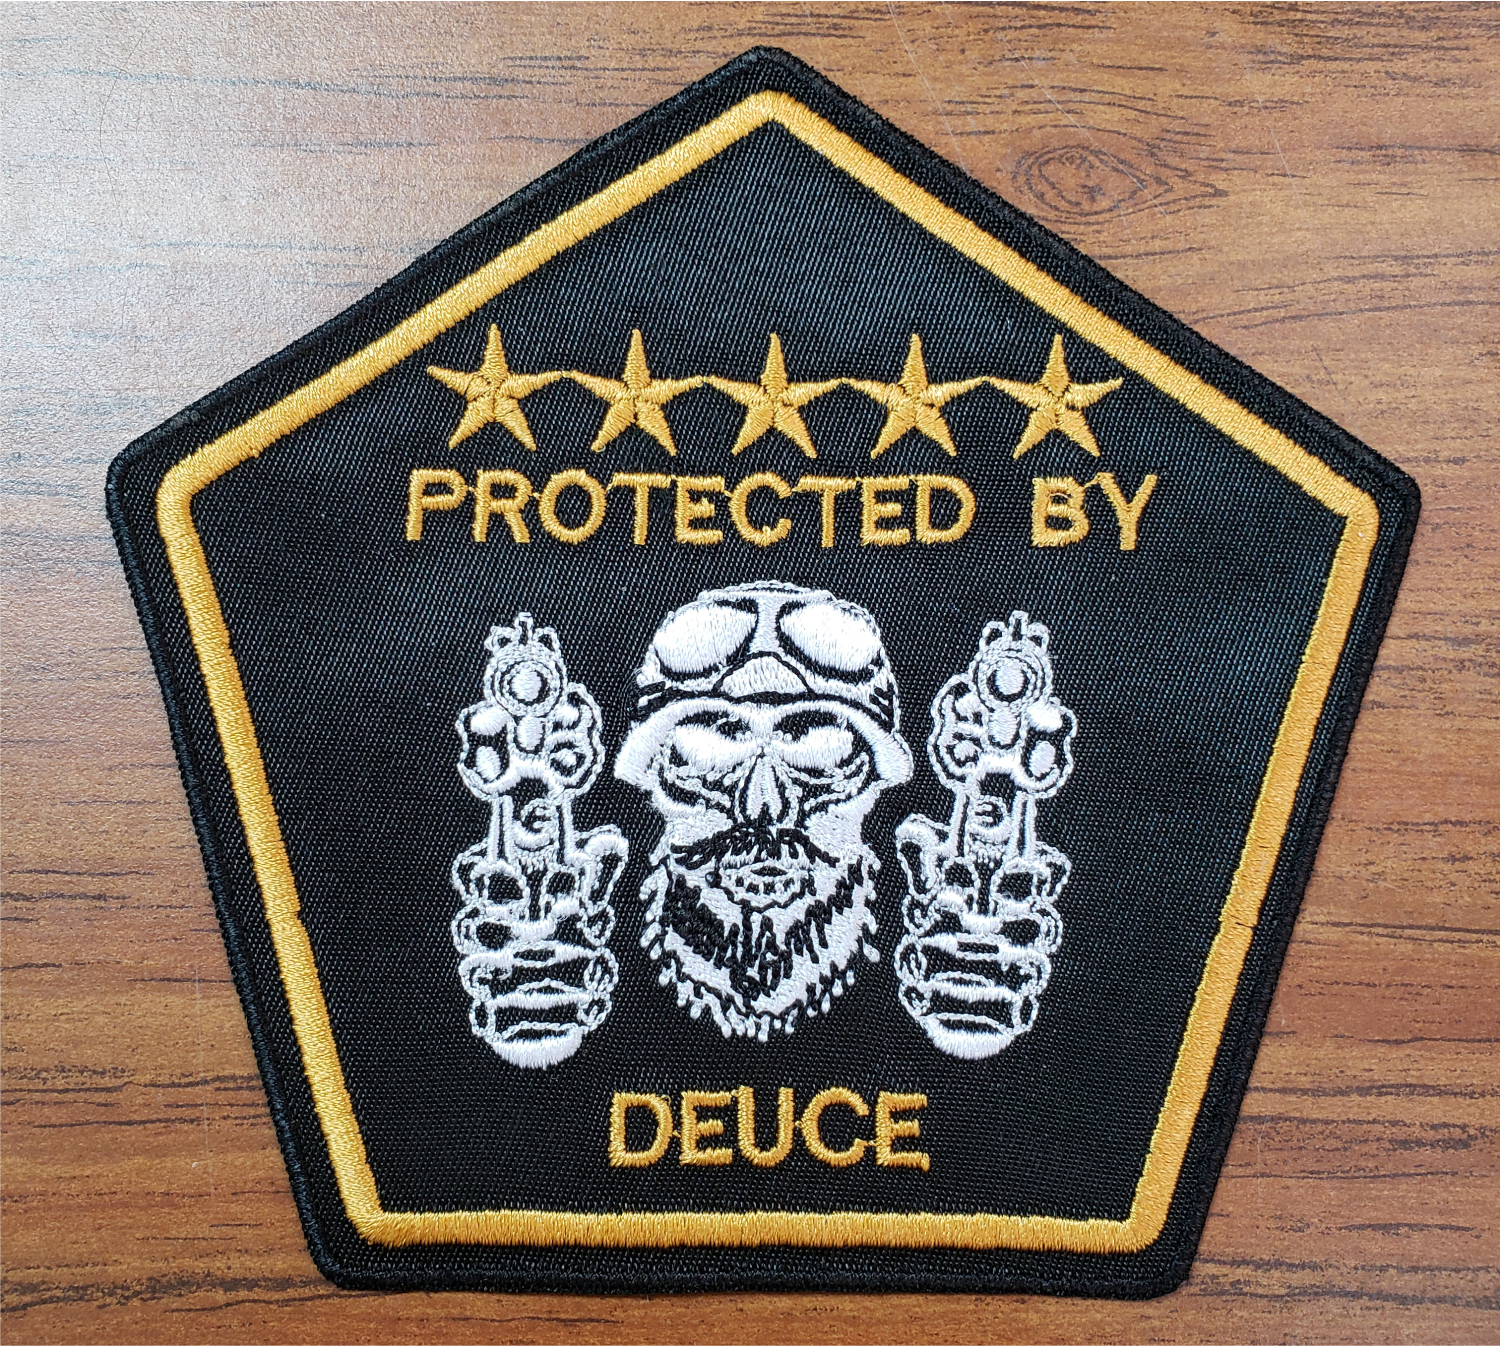 US Veterans MC Ladies' Protected by Patch